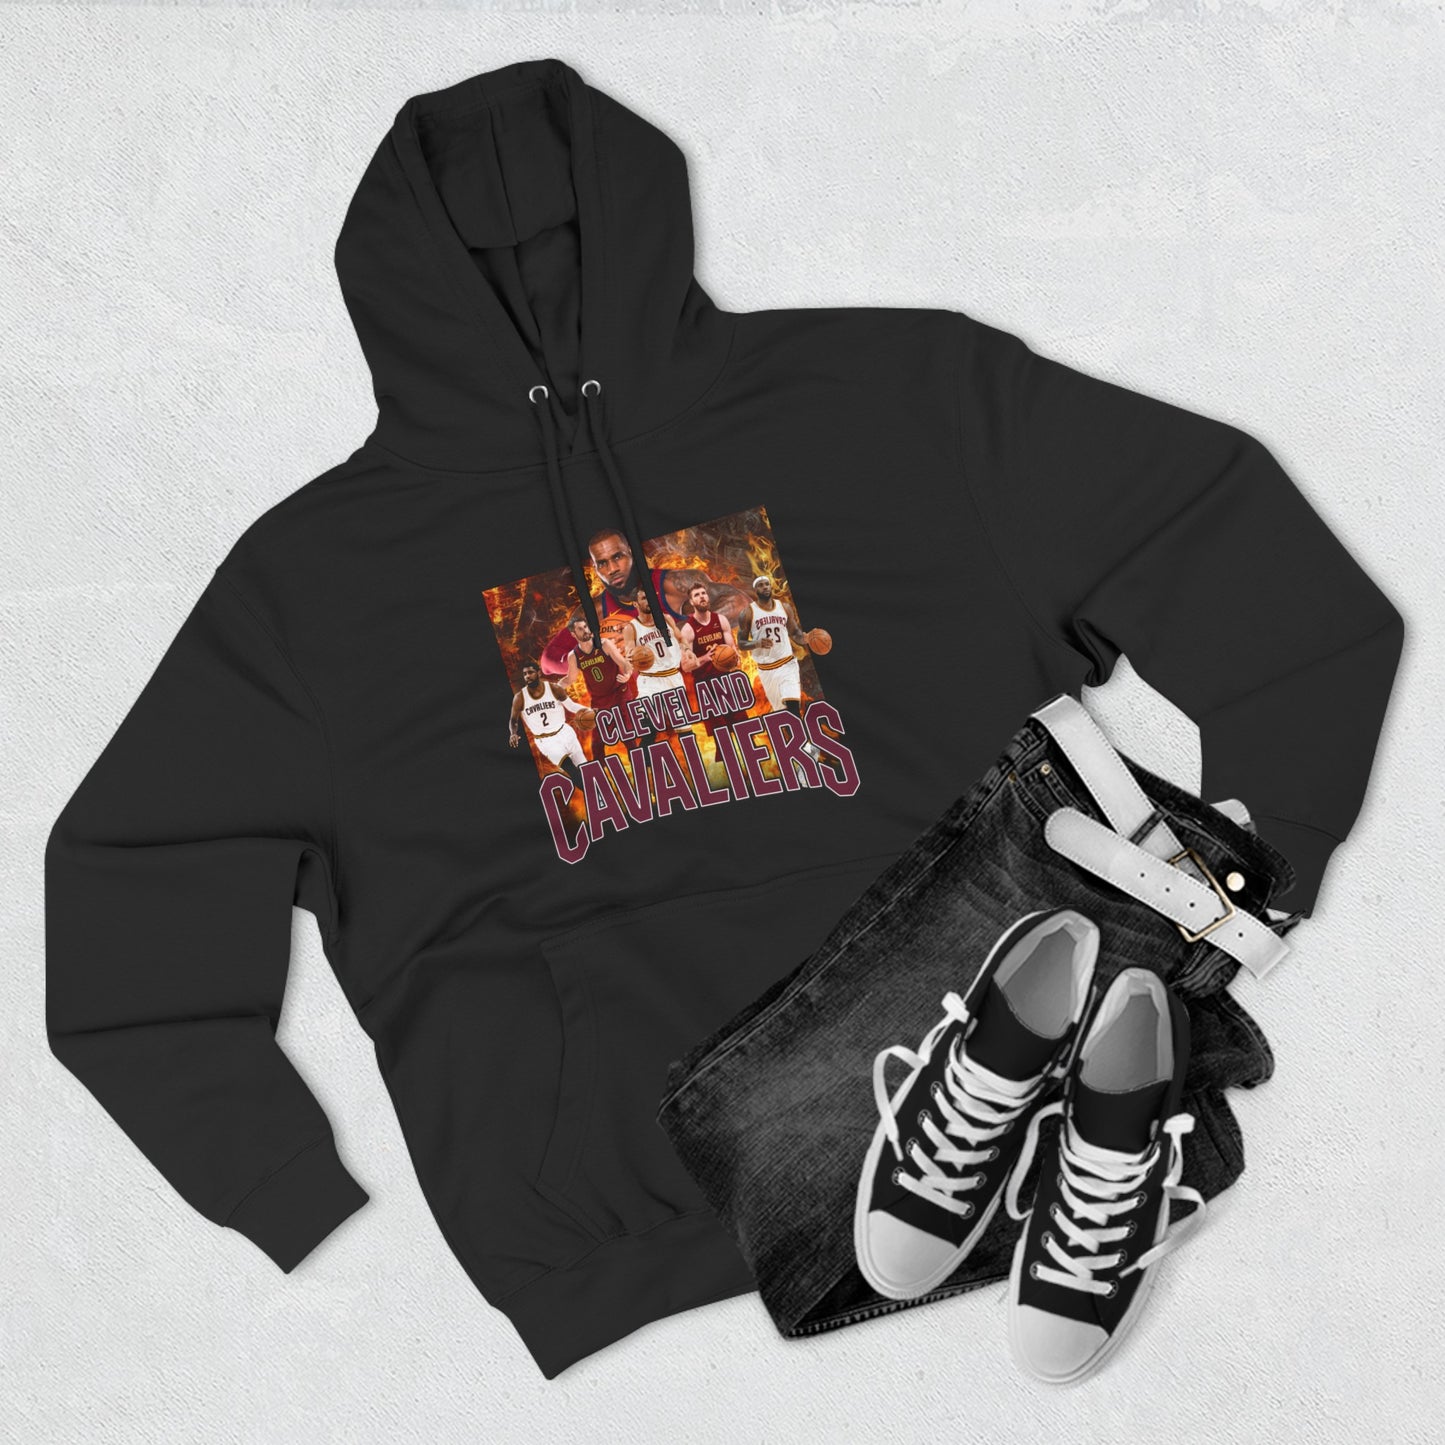 Cleveland Cavaliers High Quality Unisex Heavy Blend™ Hoodie